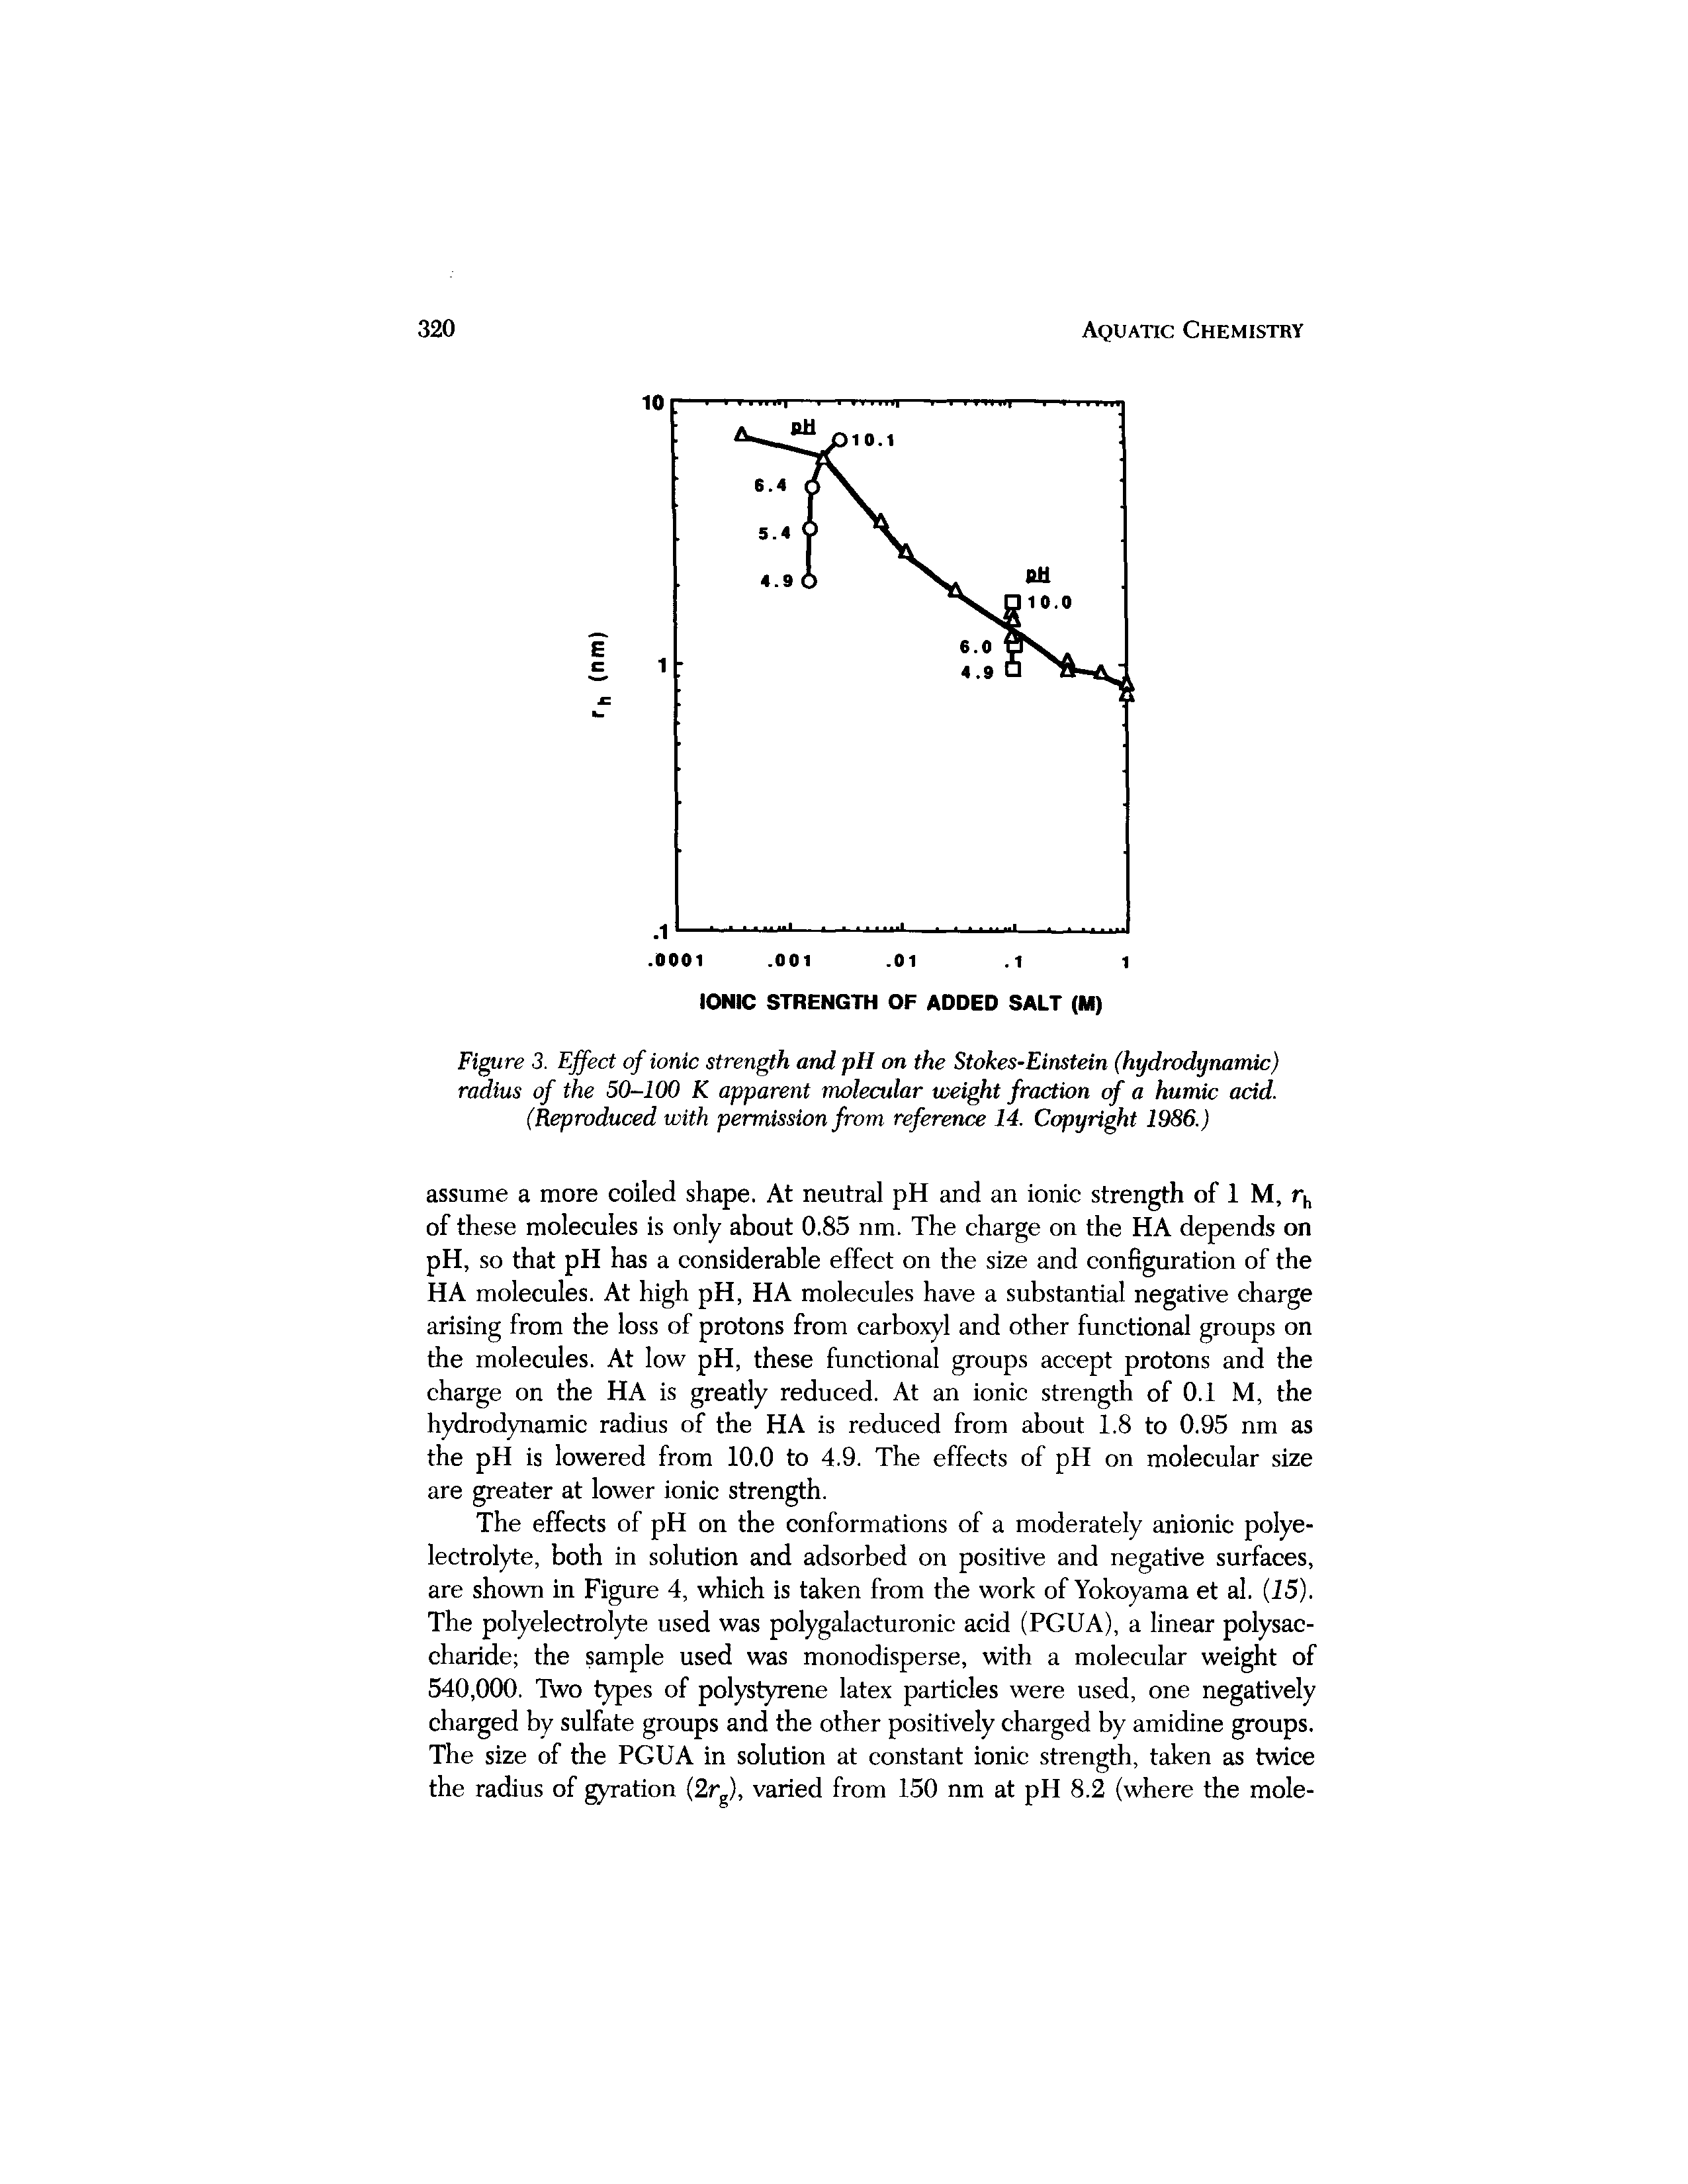 Figure 3. Effect of ionic strength and pH on the Stokes-Einstein (hydrodynamic) radius of the 50-100 K apparent molecular weight fraction of a humic acid.